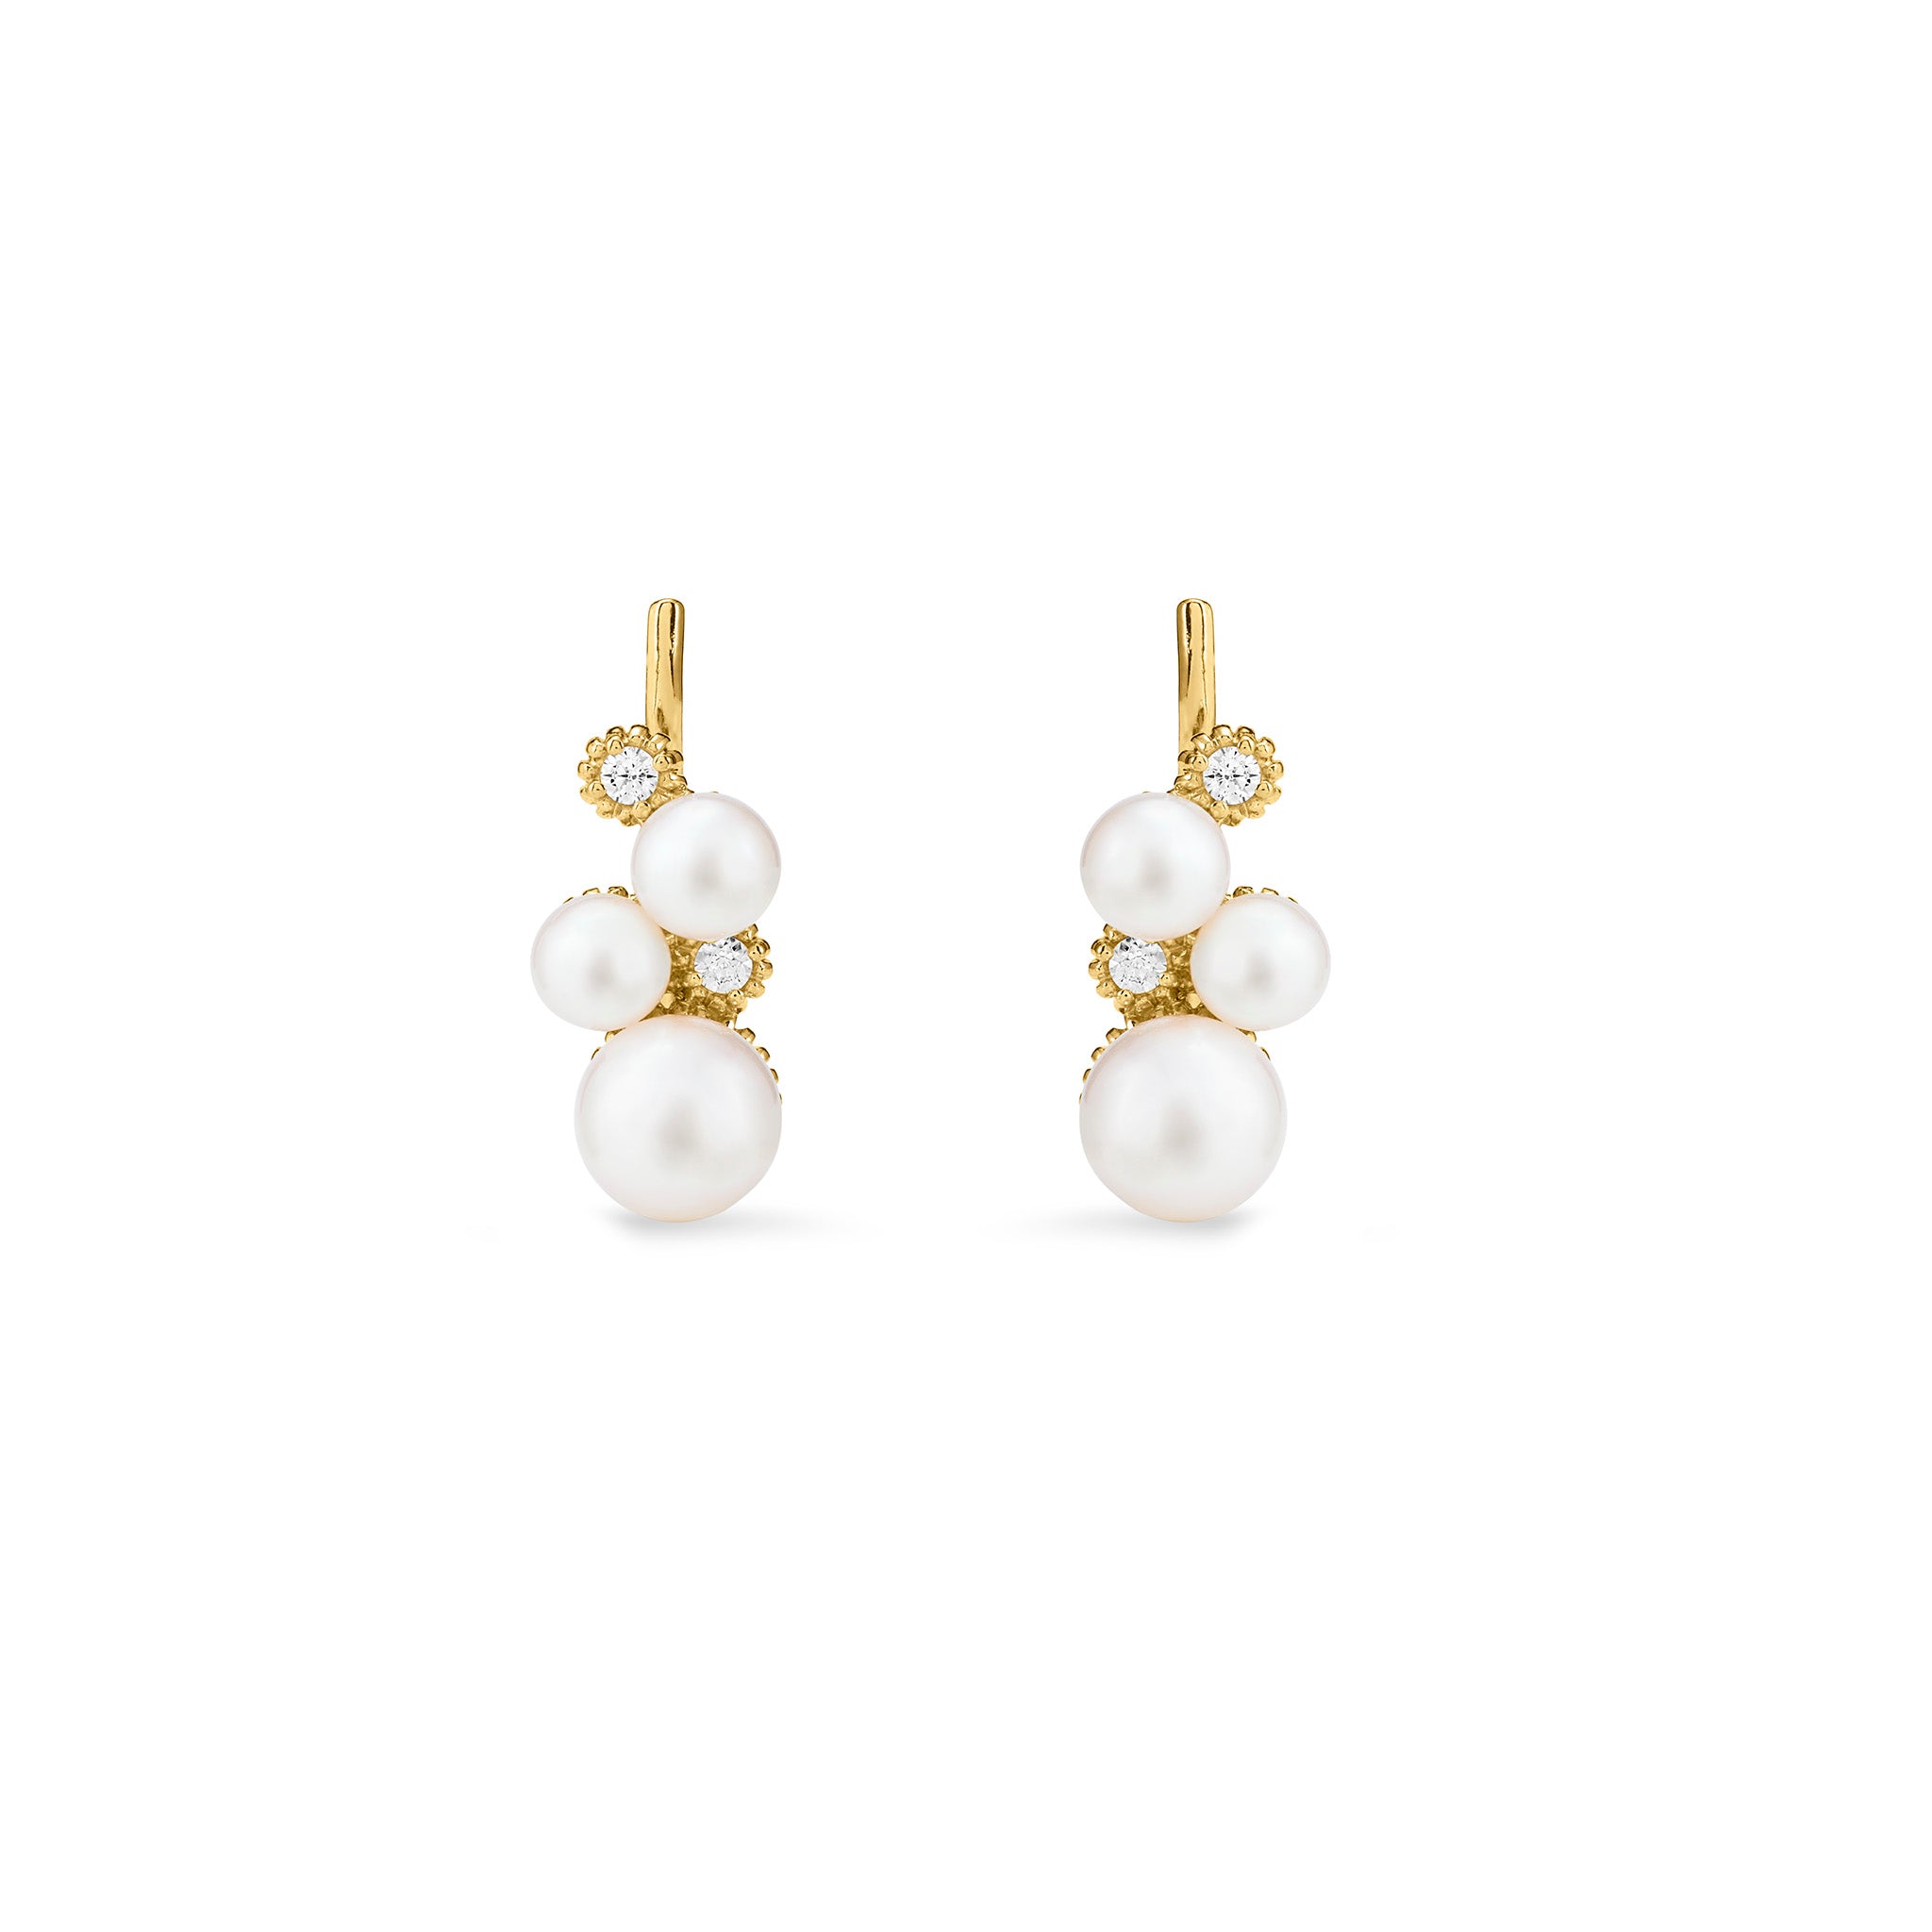 Shima Ear Climbers with Freshwater Pearls and Diamonds in 18K